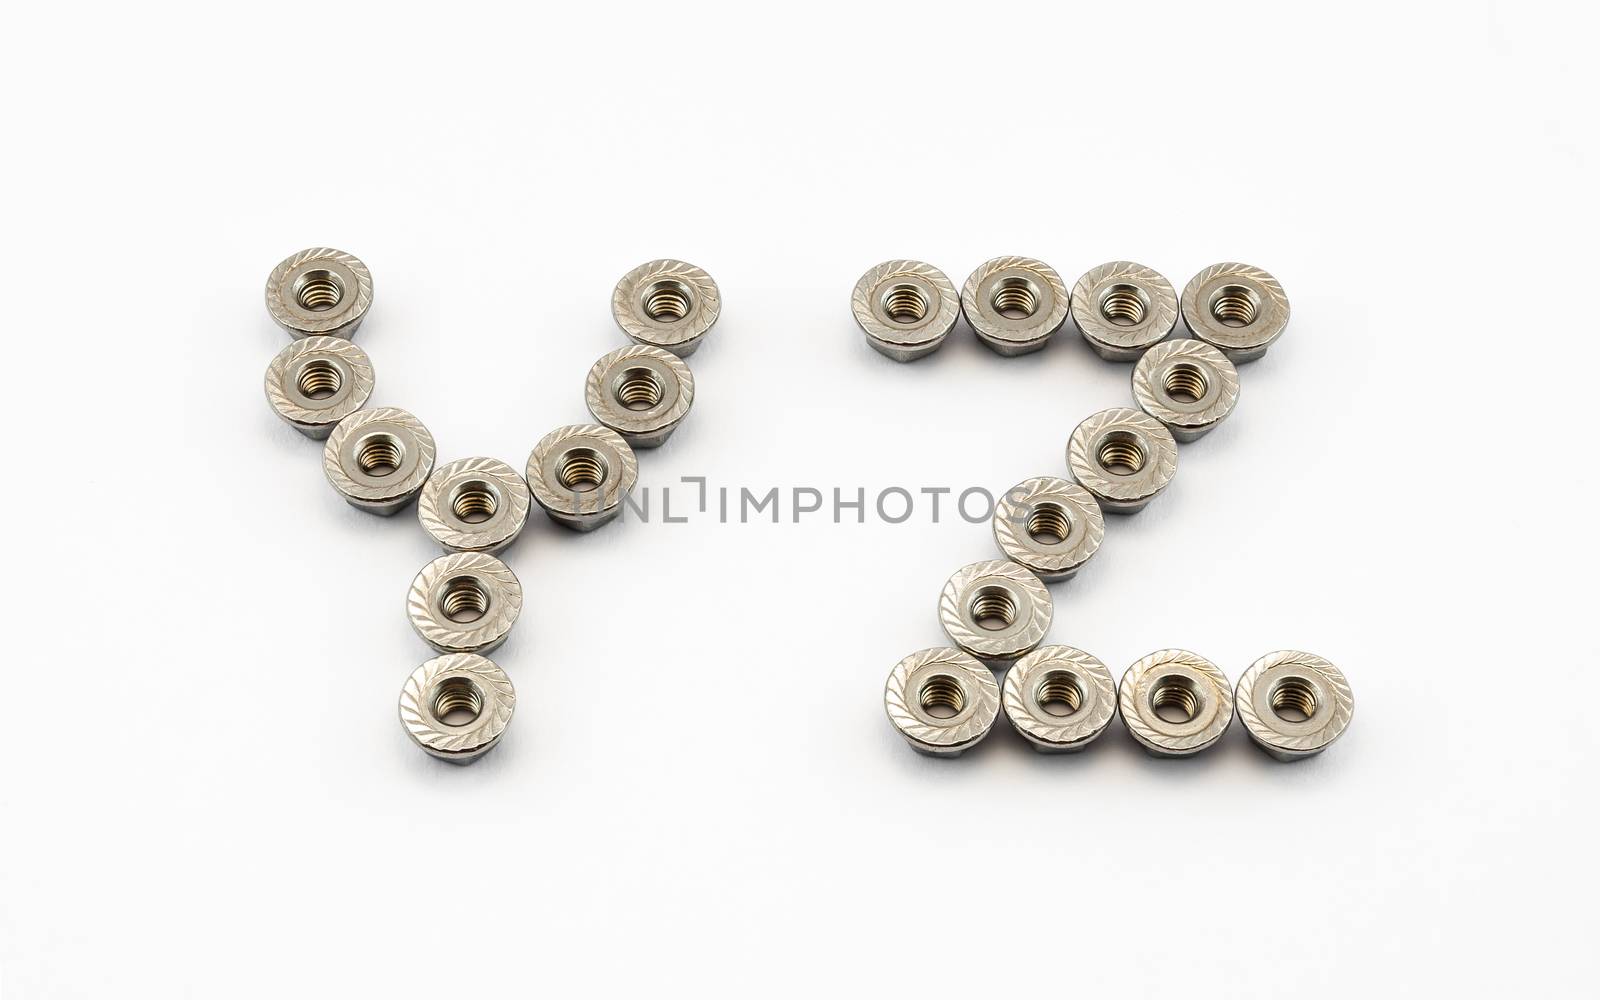 Y and Z Alphabet, Created by Stainless Steel Hex Flange Nuts.